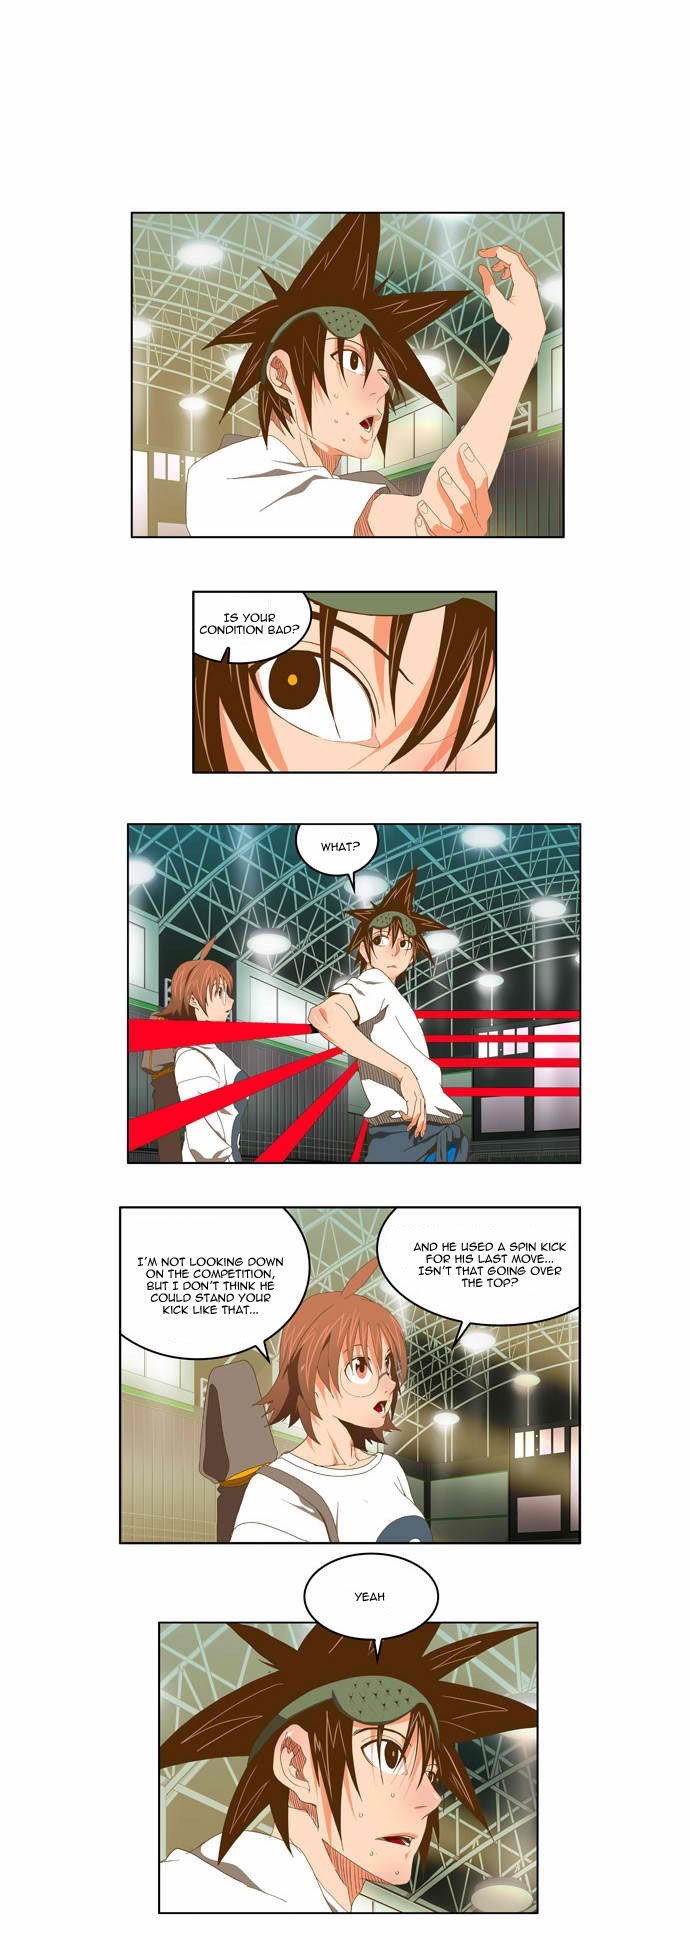 The God of High School chapter 79 page 6